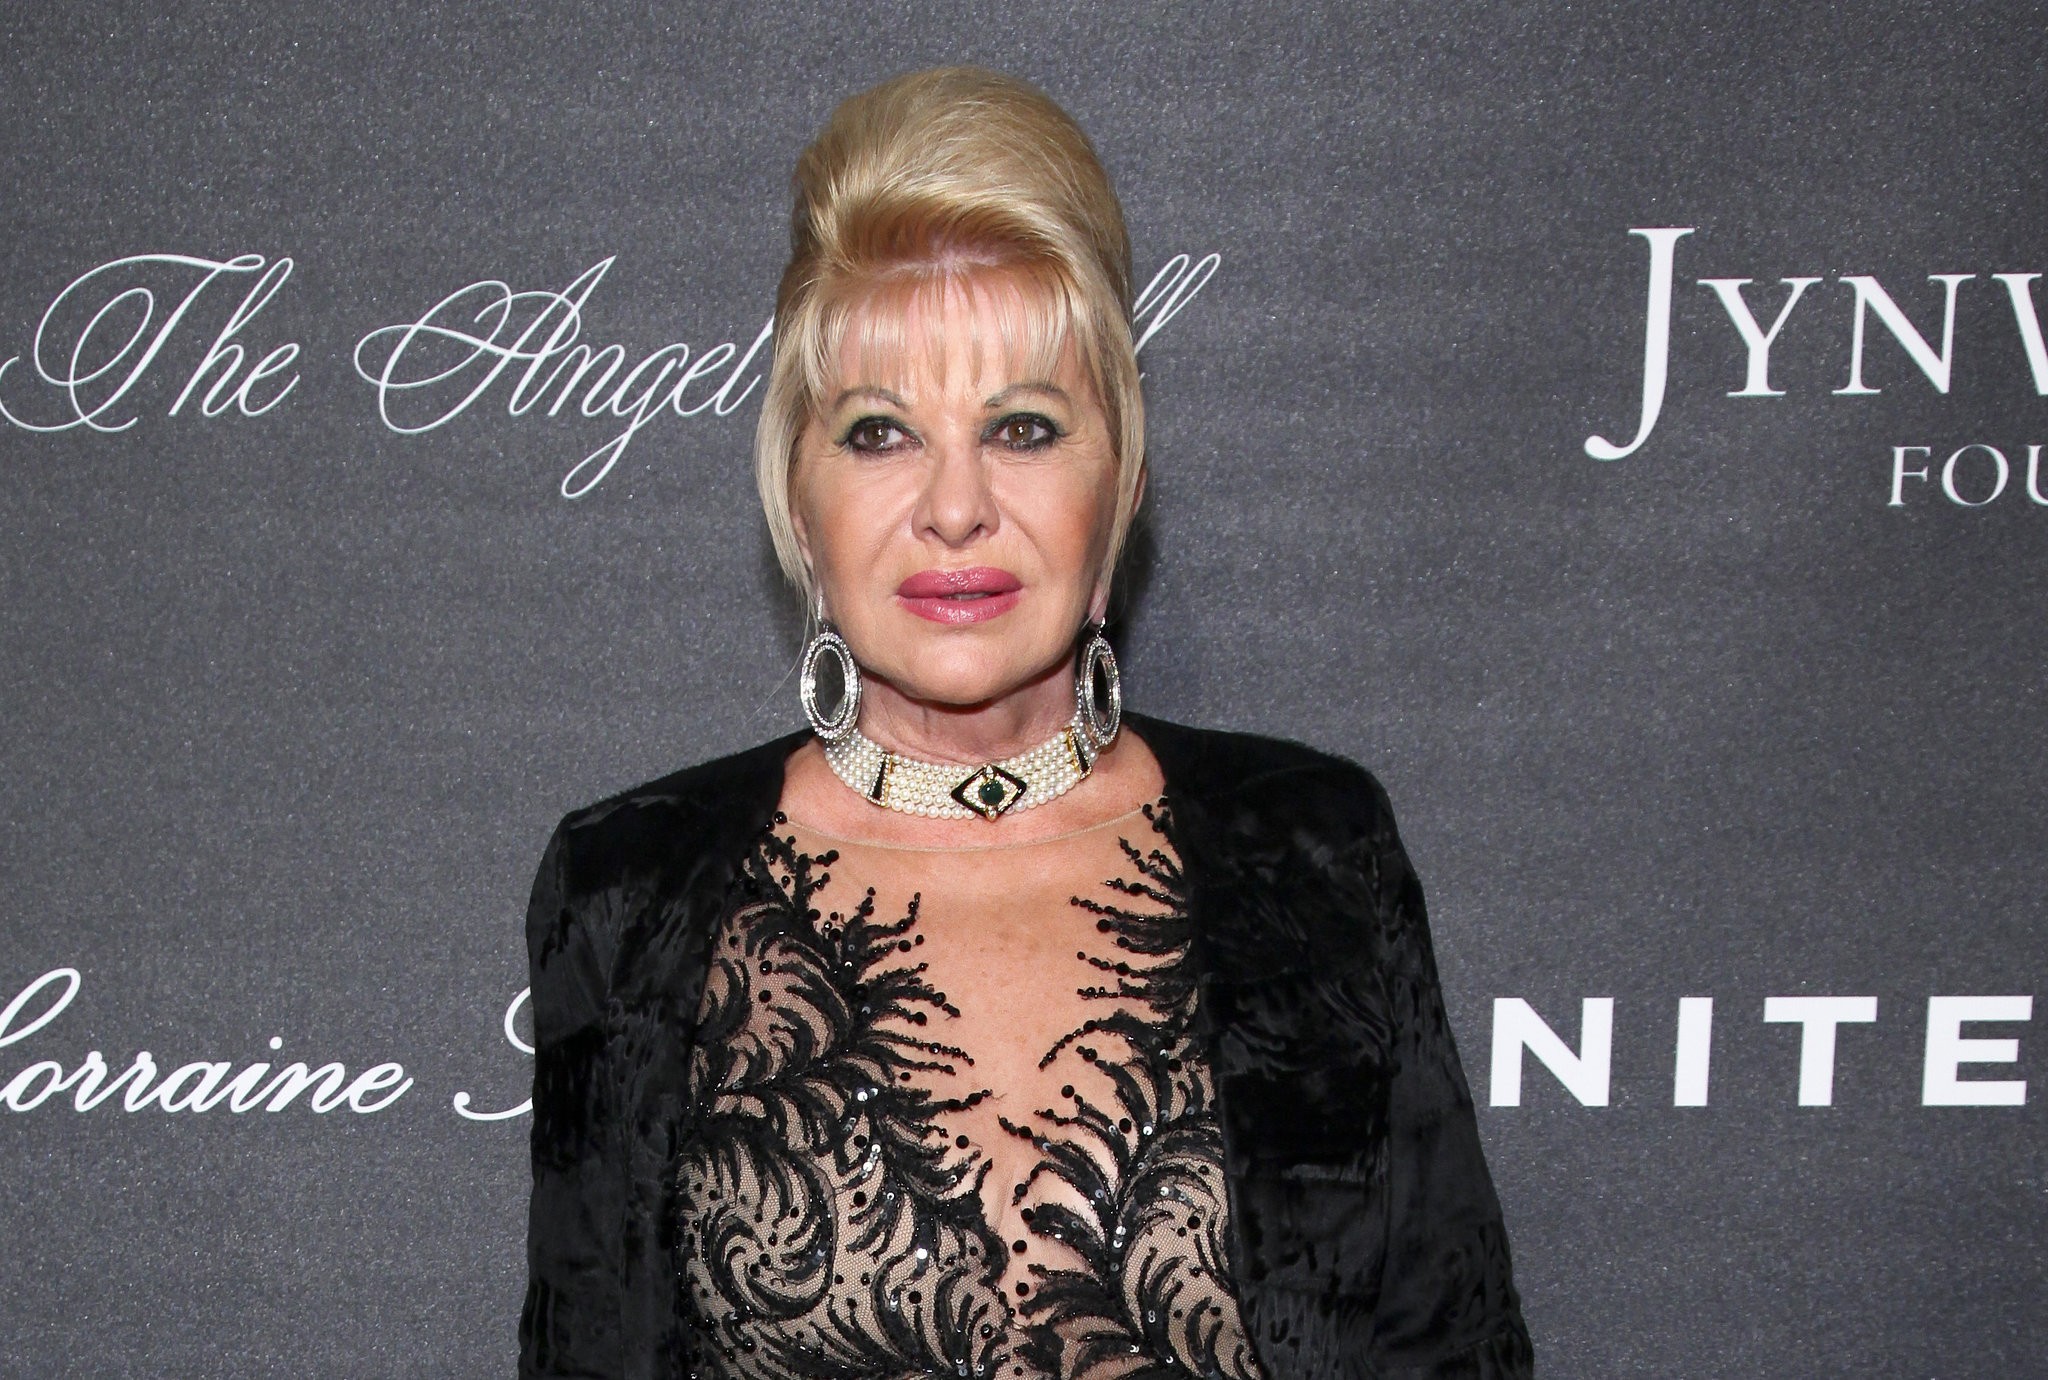 Ivana Trump, first wife of Donald Trump, is dead at 73